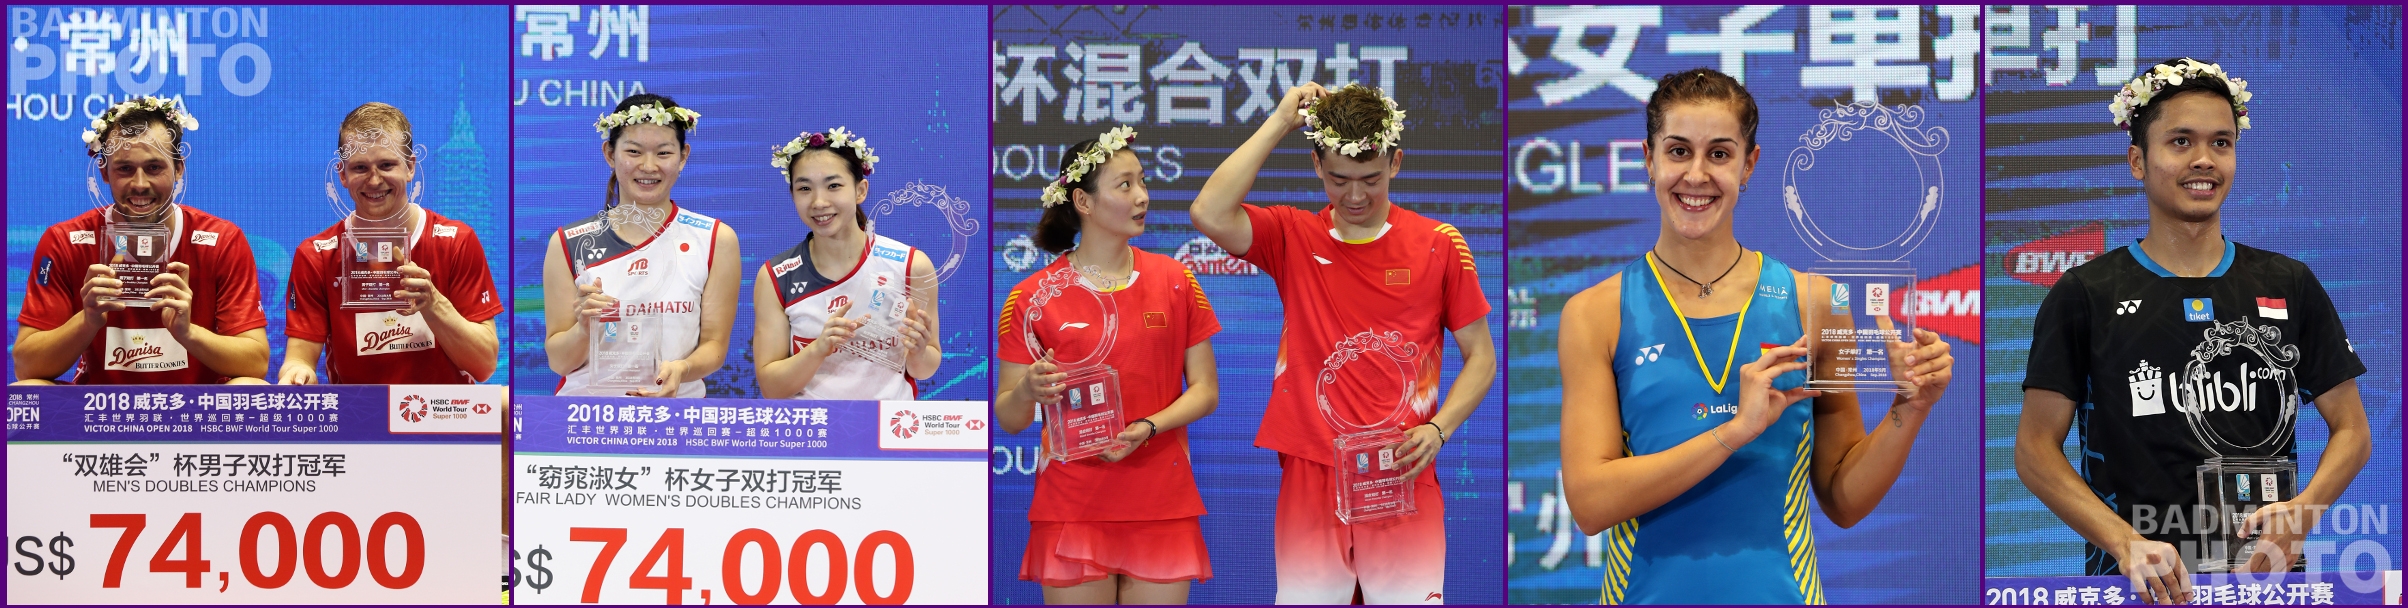 Winners from Denmark, Japan, China, Spain, and Indonesia at the 2018 China Open